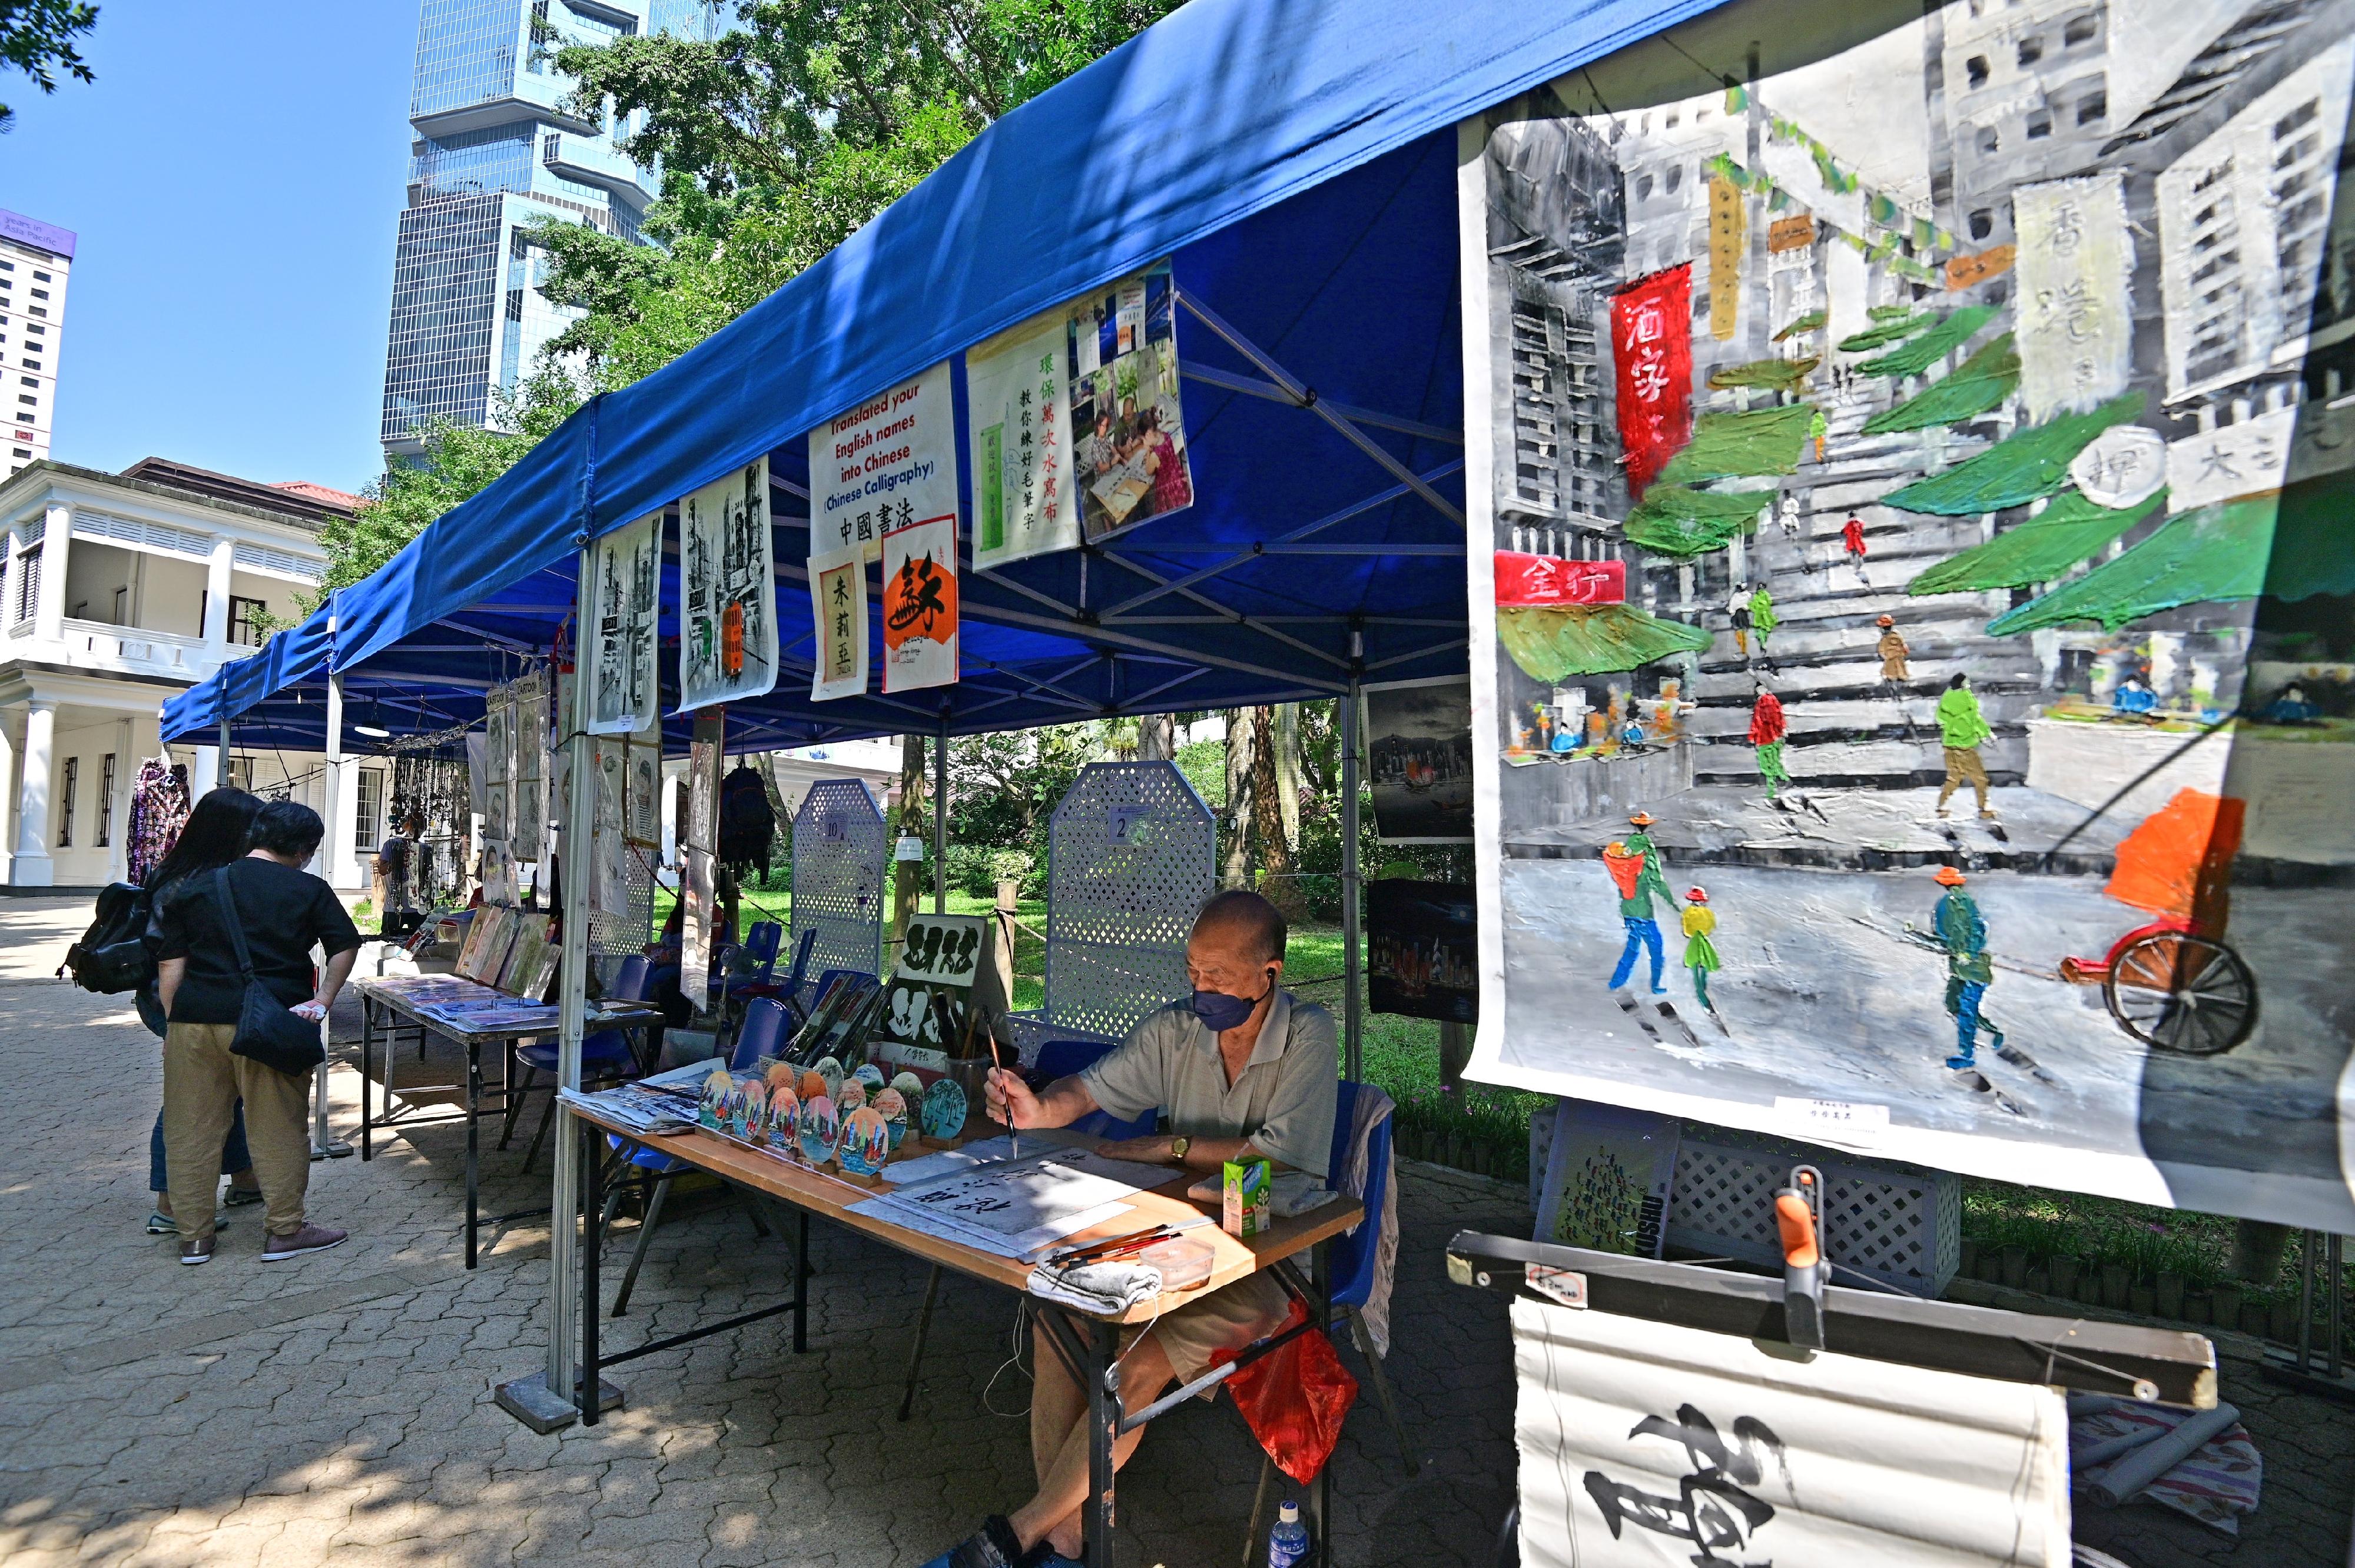 The Leisure and Cultural Services Department invites members of the public to visit the Arts Corner at Hong Kong Park on Saturdays, Sundays and public holidays from January 1 to December 31, 2023. The Arts Corner comprises 10 stalls displaying and selling various kinds of handicrafts and artistic works such as fabric crafts, floral artworks and ornaments, as well as providing cultural and arts services including painting, portrait sketching, calligraphy and photography.